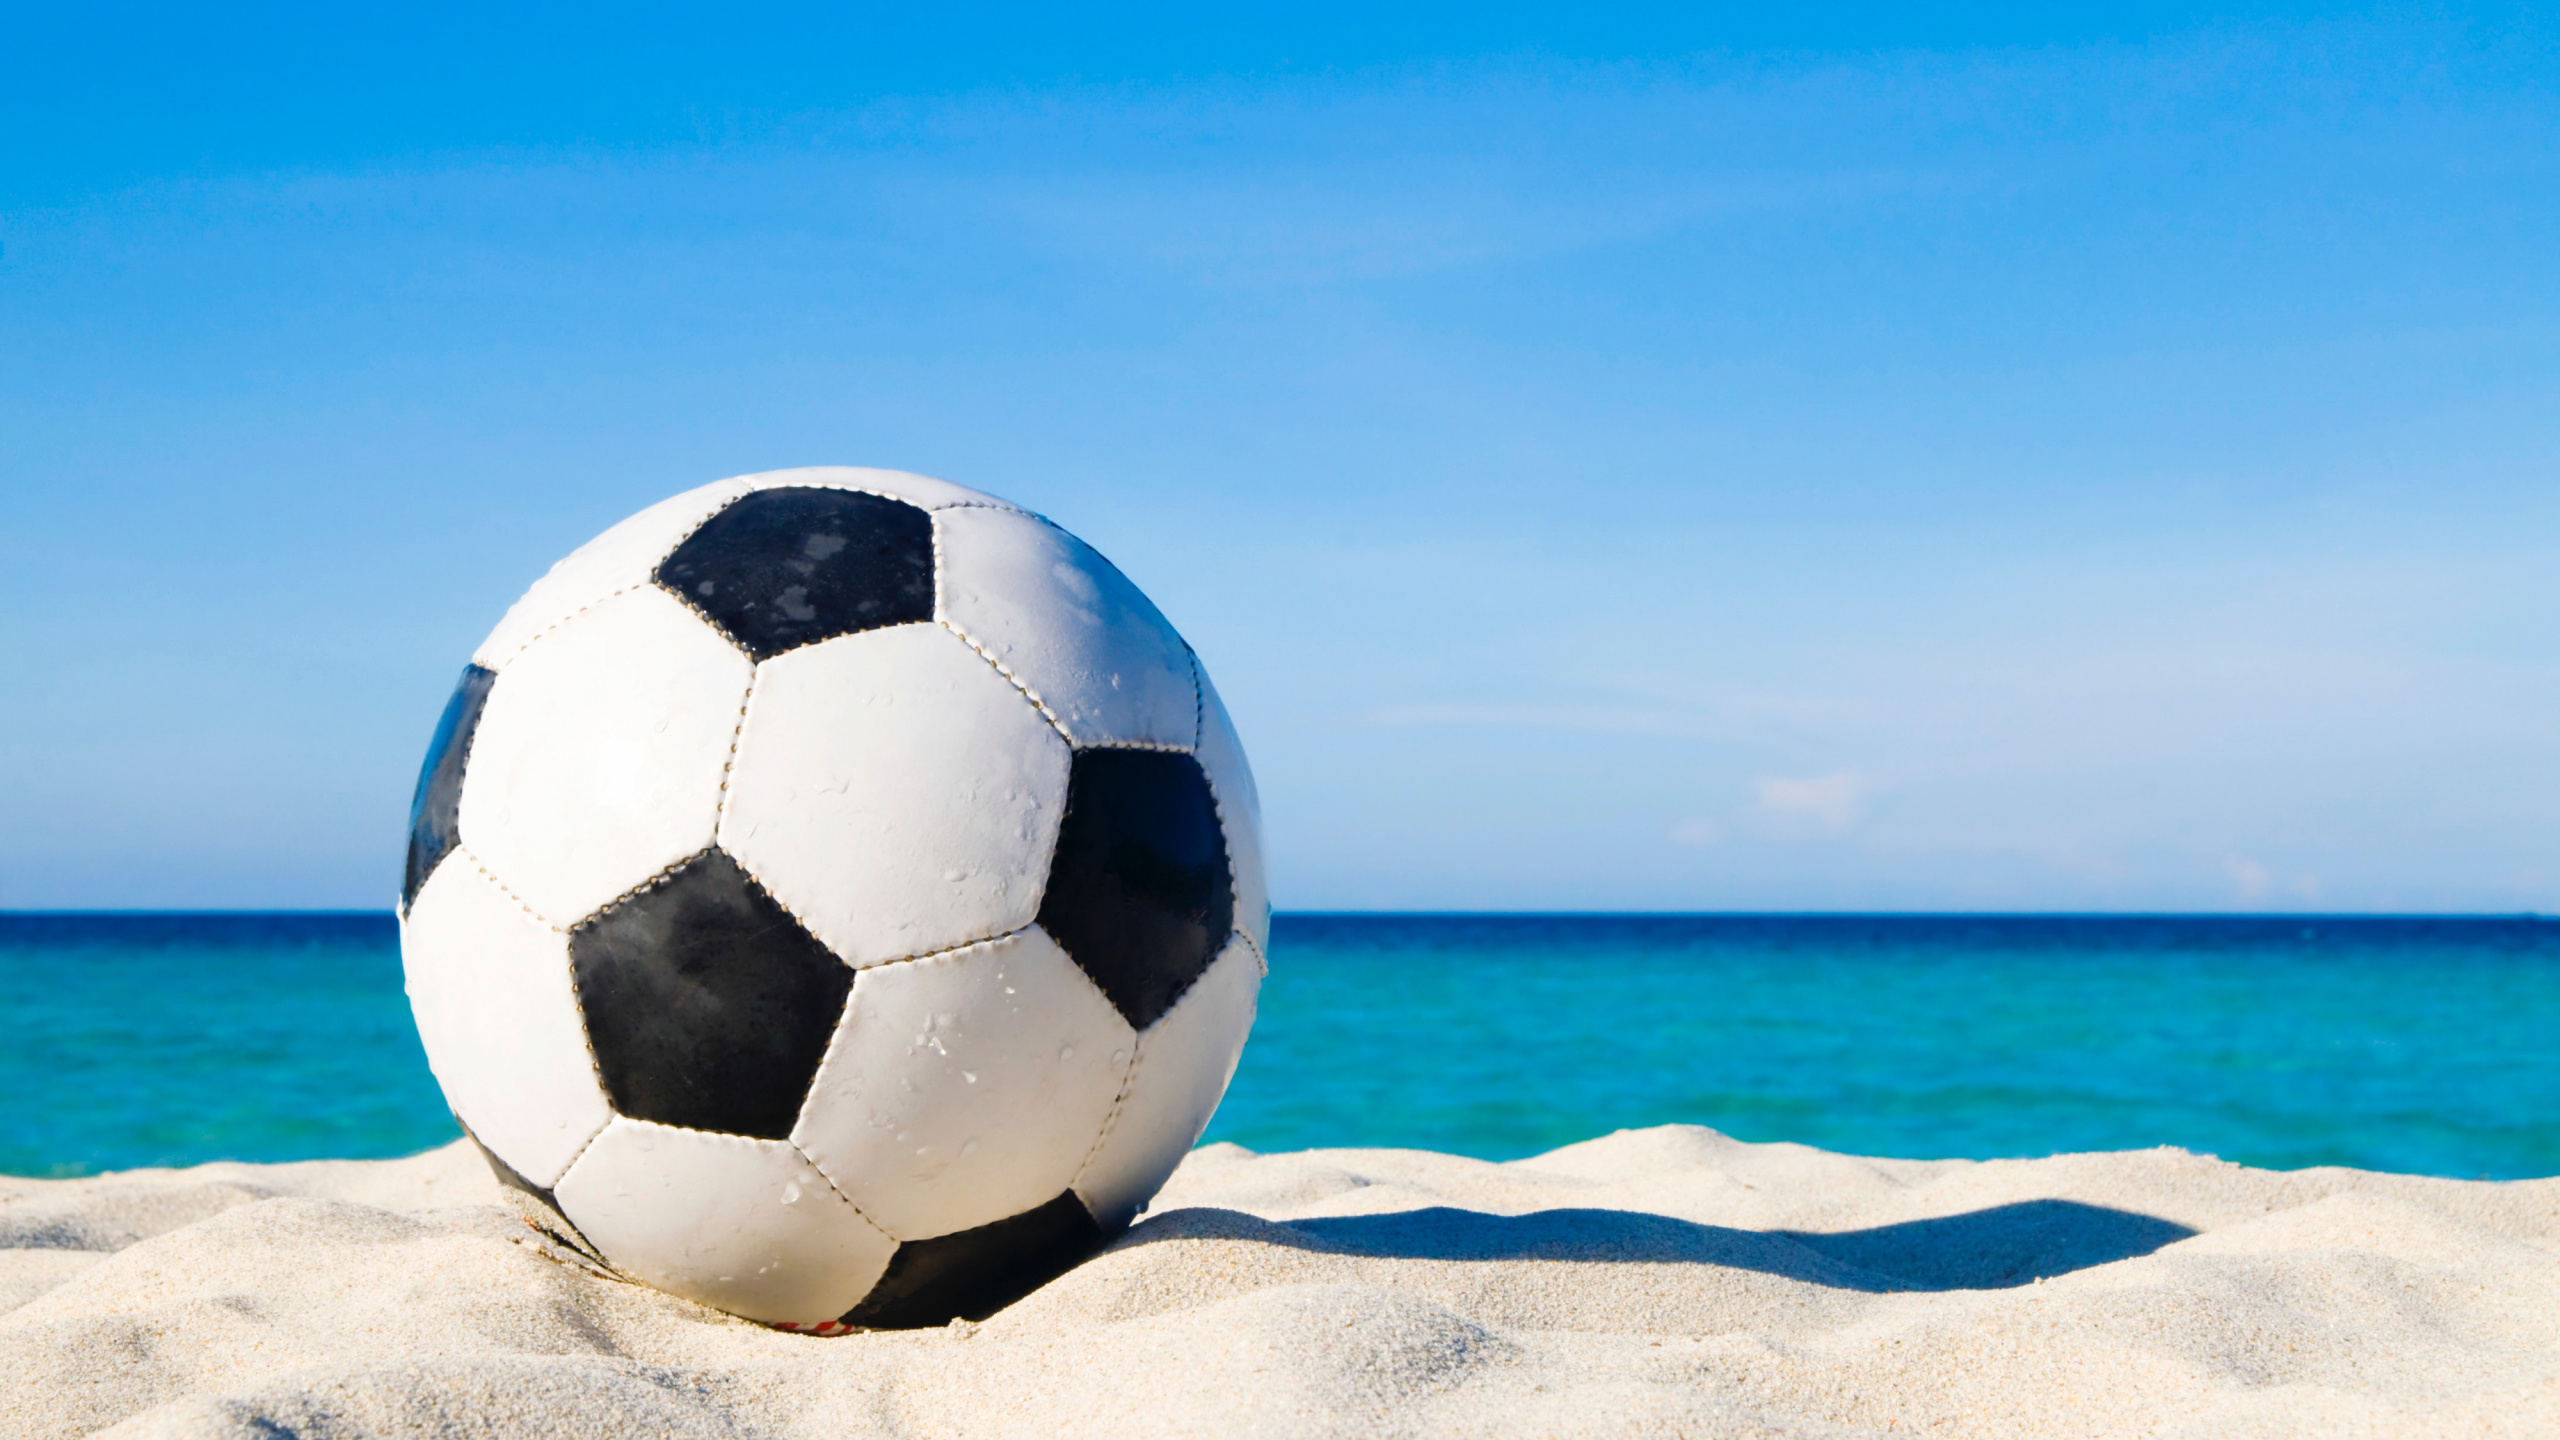 White and Black Soccer Ball on White Sand During Daytime. Wallpaper in 2560x1440 Resolution